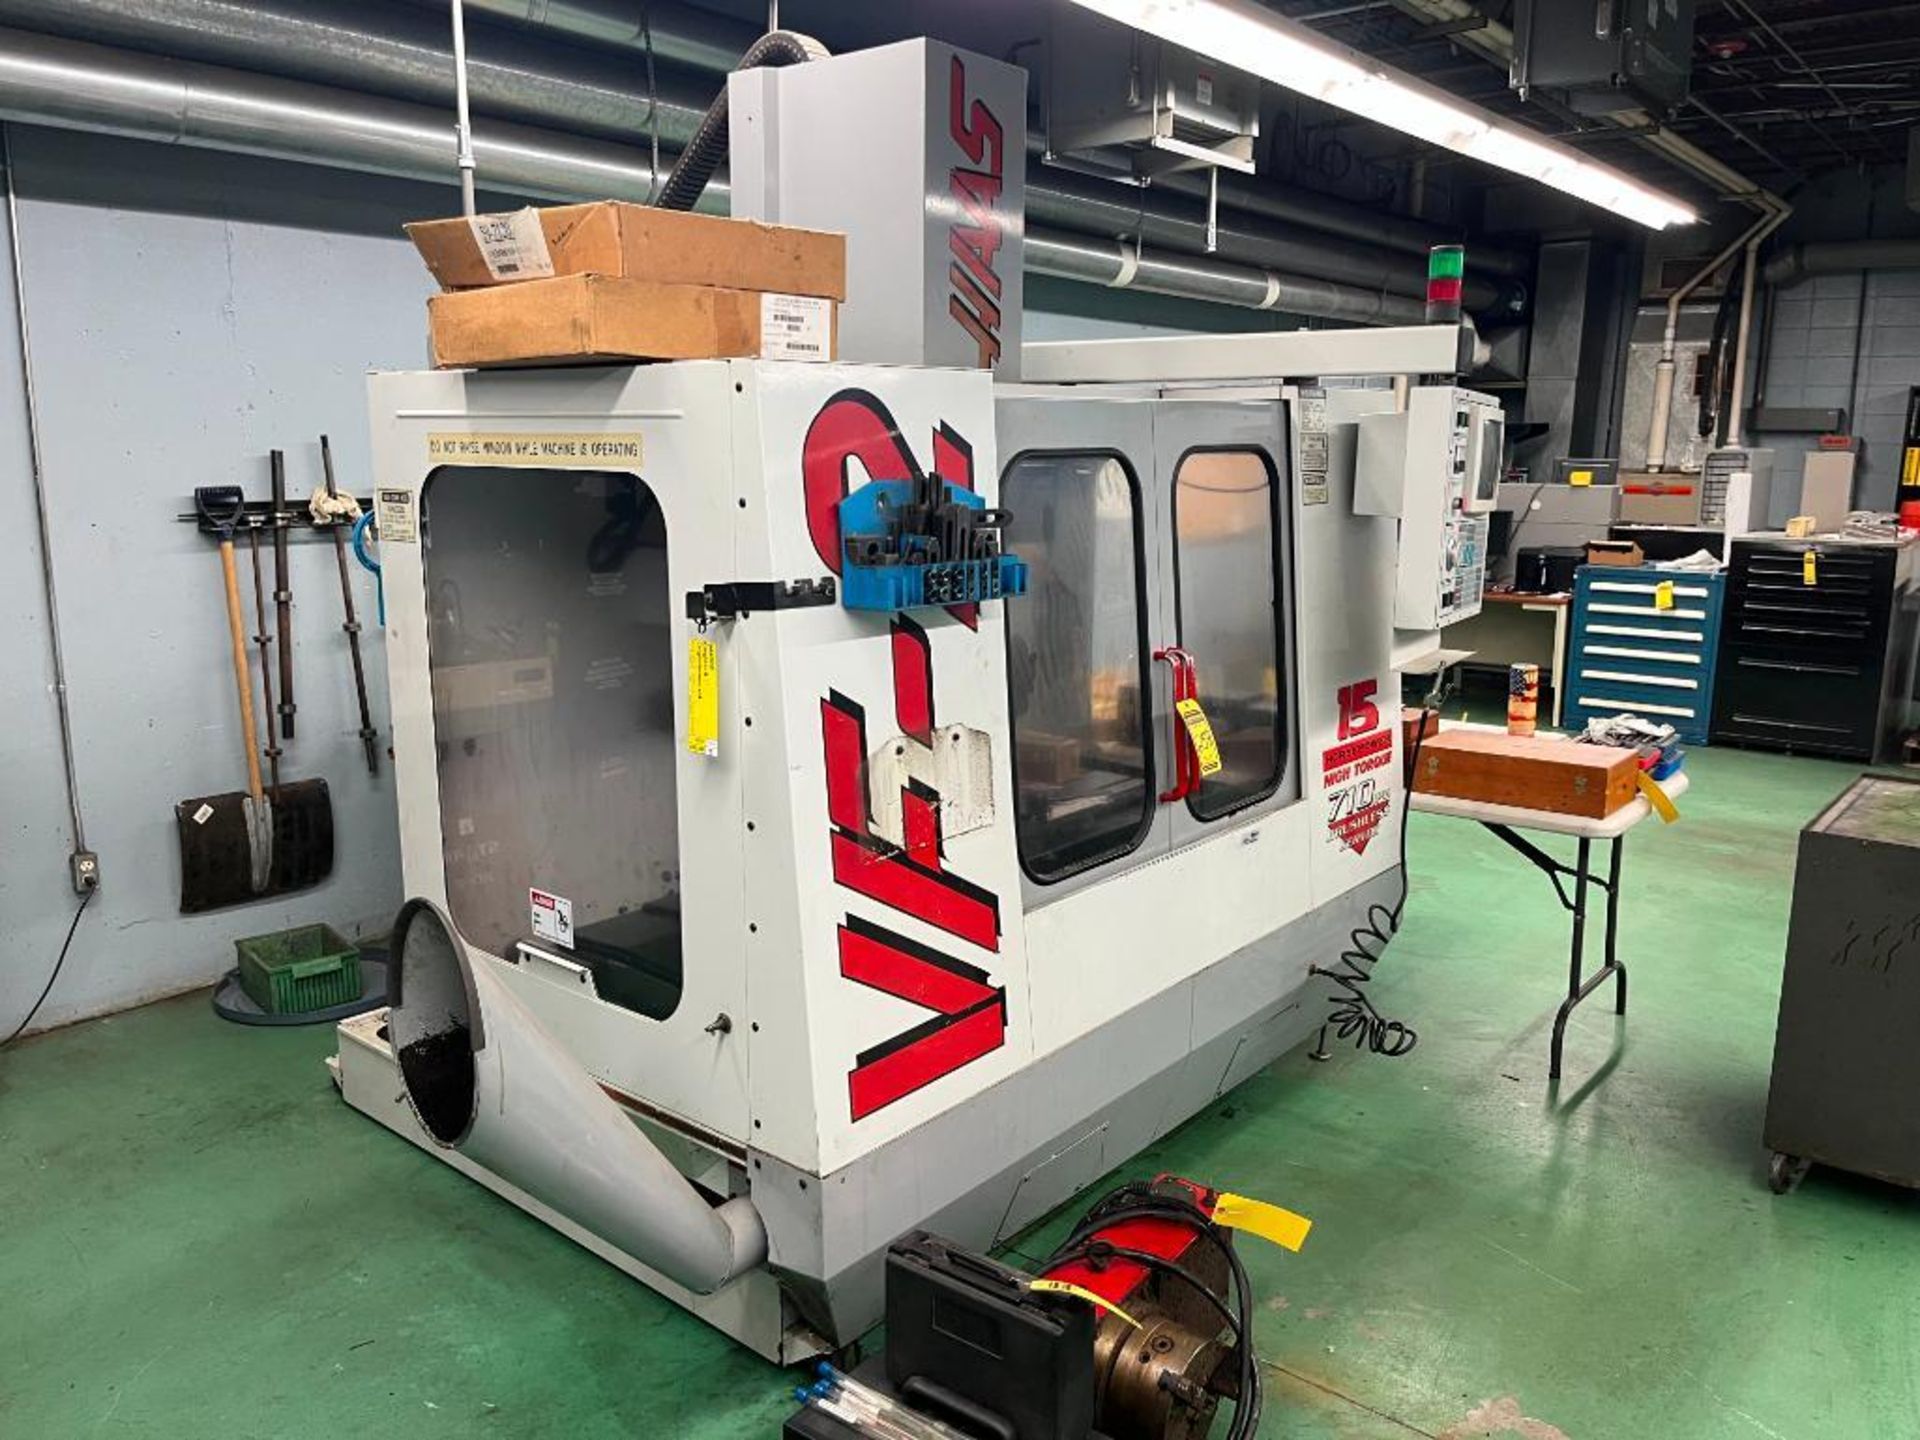 1997 Haas 4th Axis Vertical Machining Center, Model VF-2, S/N 10631, 3-Phase, 230 Volt, 36" X 14" Ta - Image 2 of 11